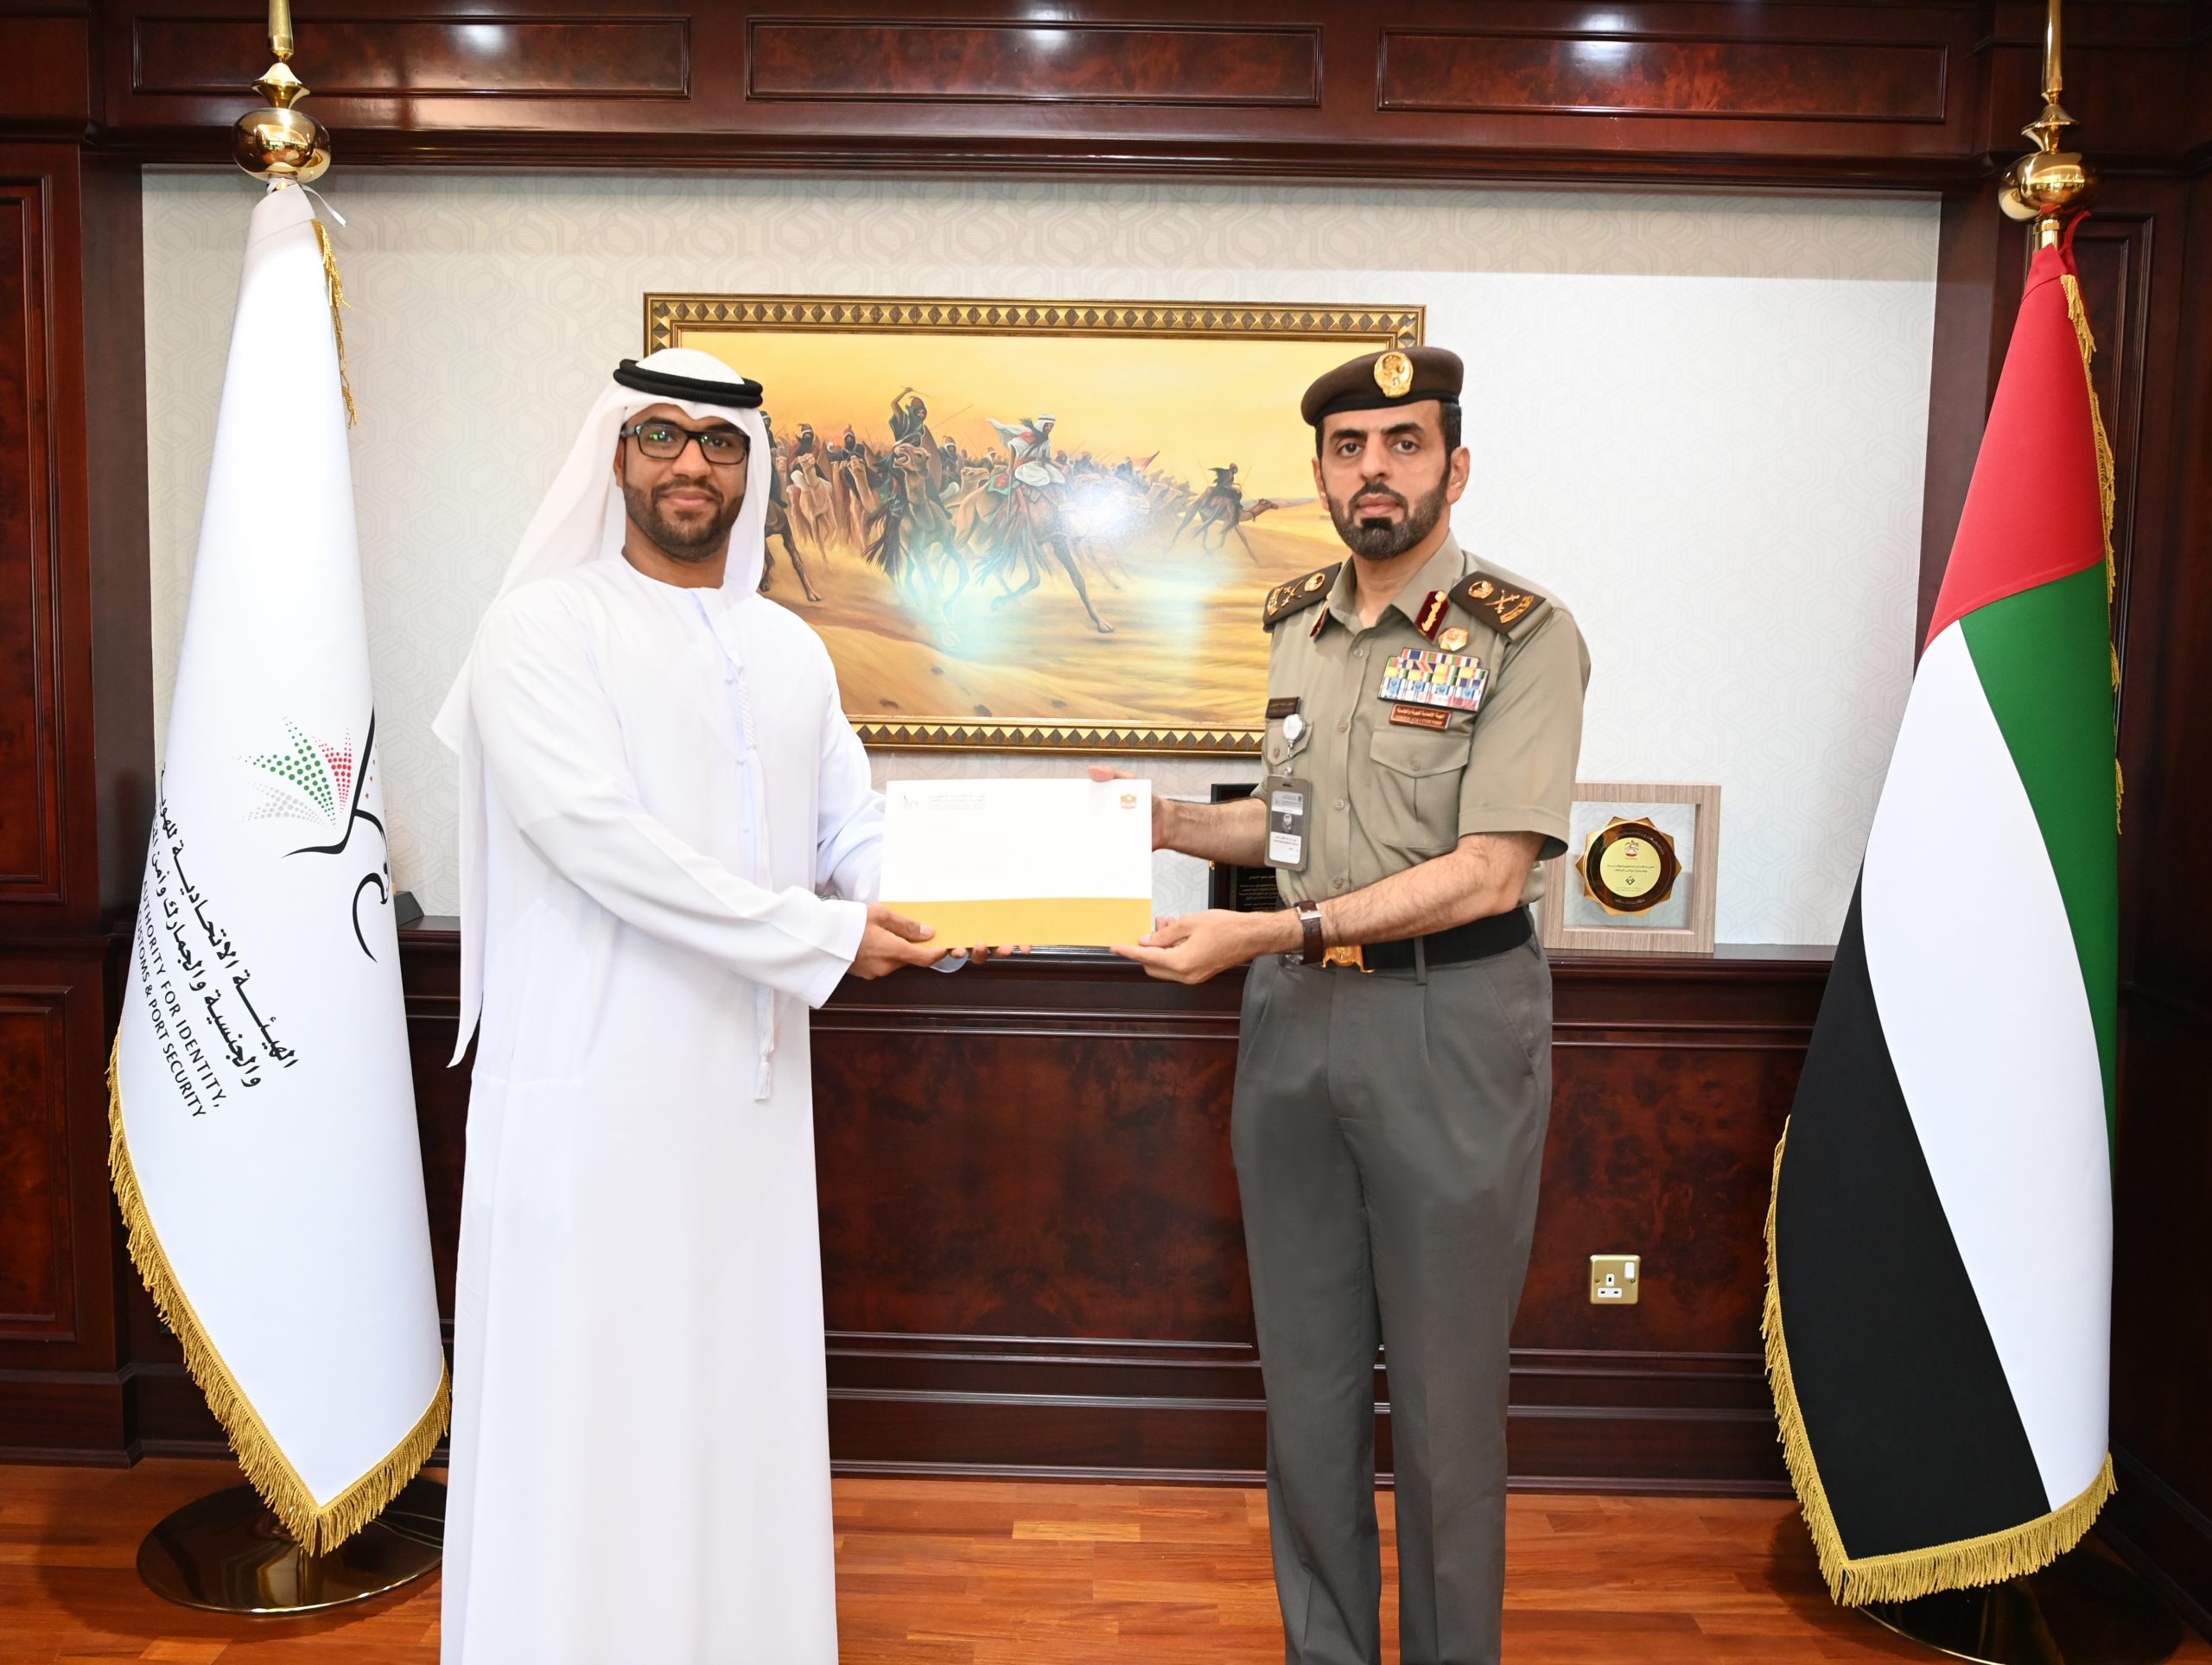 The Authority’s Director General honours the winners of the “Future Foresight Culture and Skills” competition